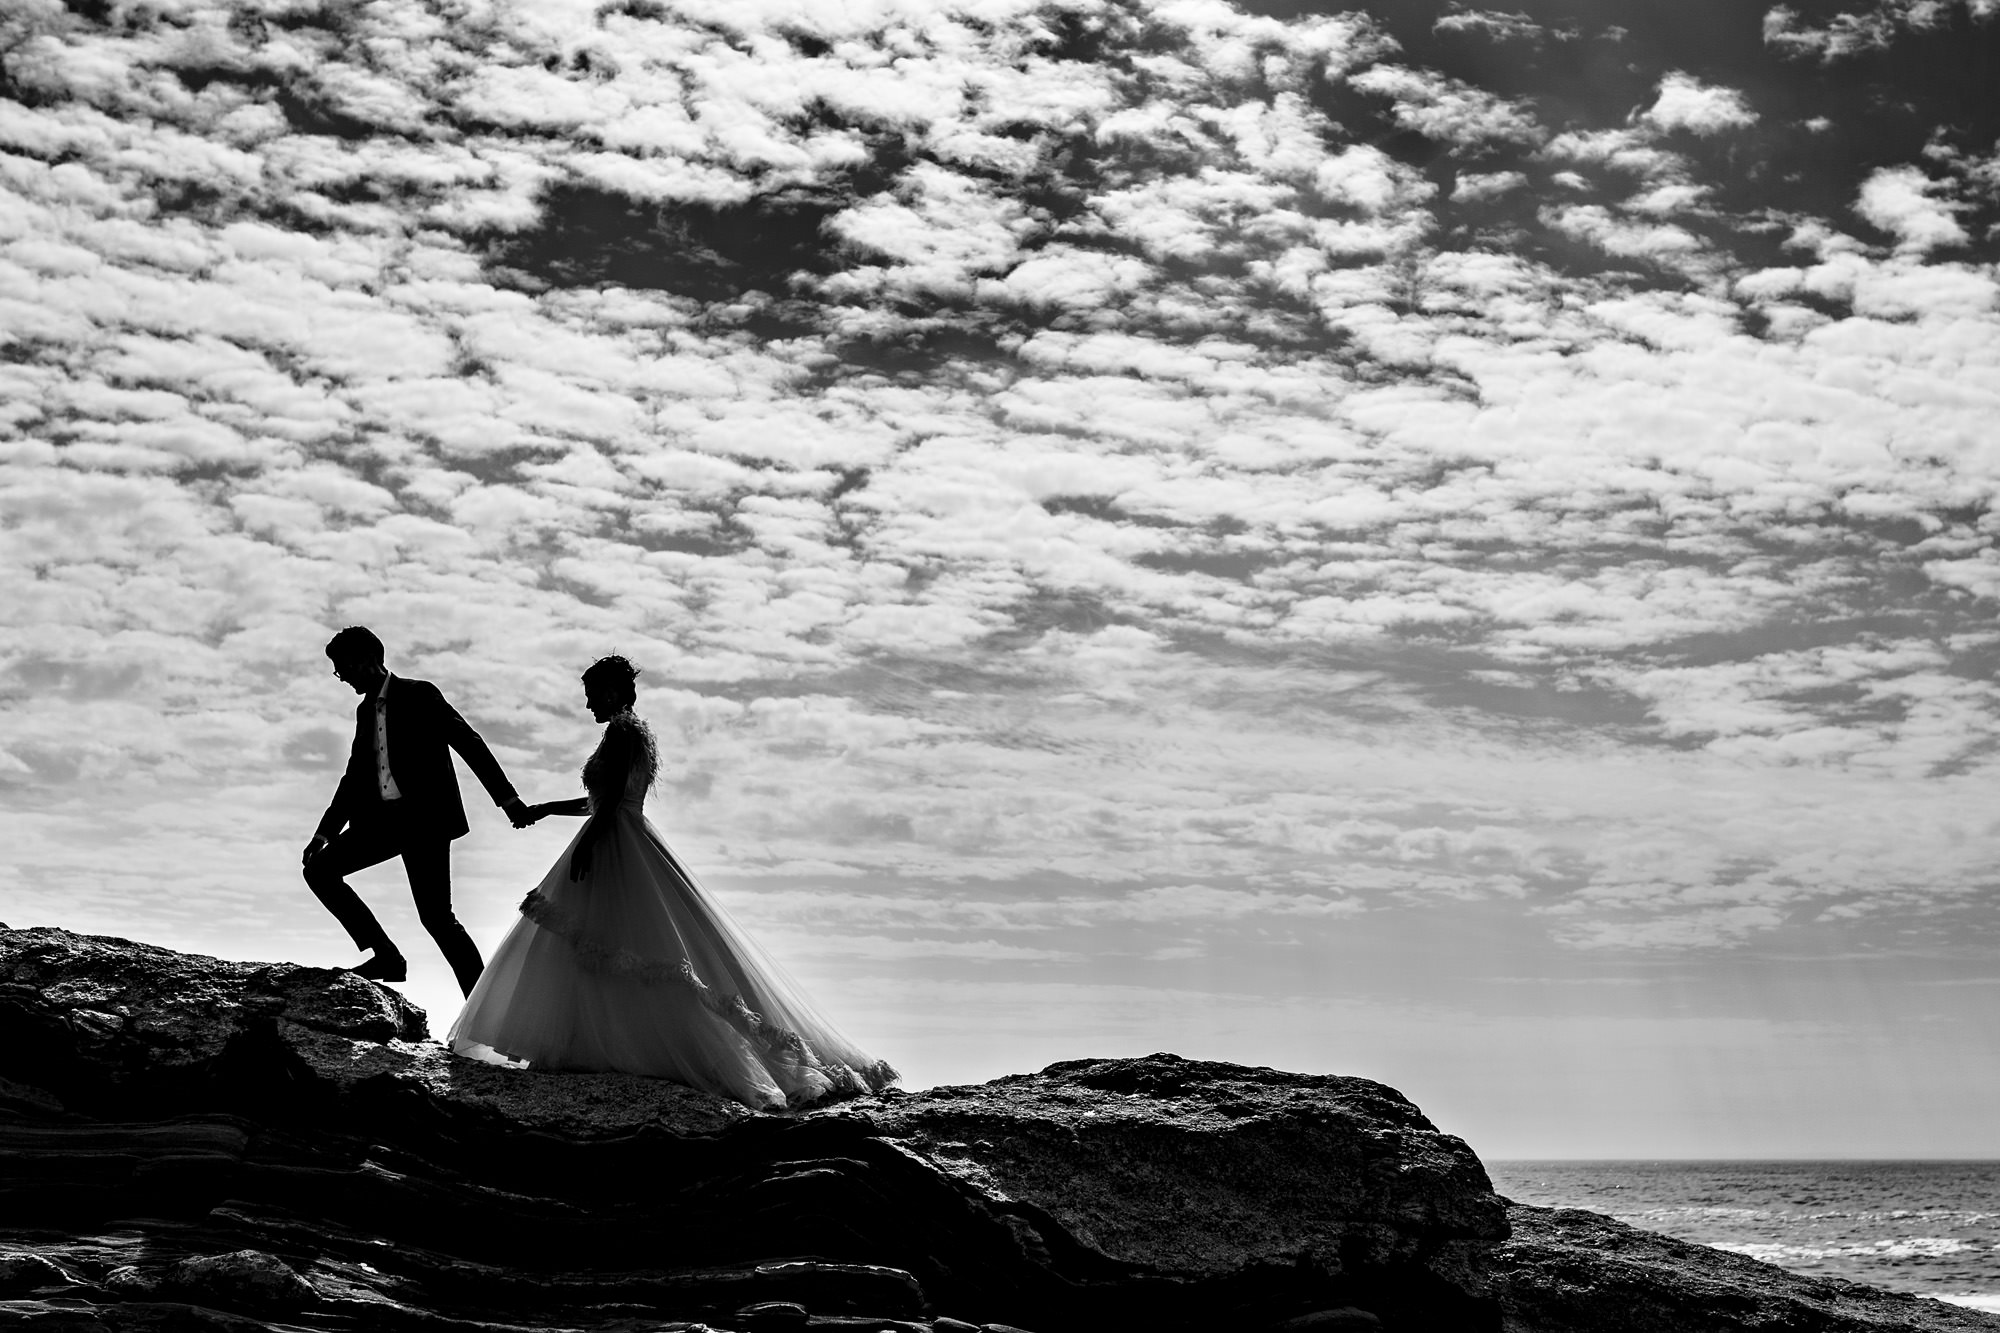 Wedding portraits taken at Pemaquid Point Lighthouse in Maine